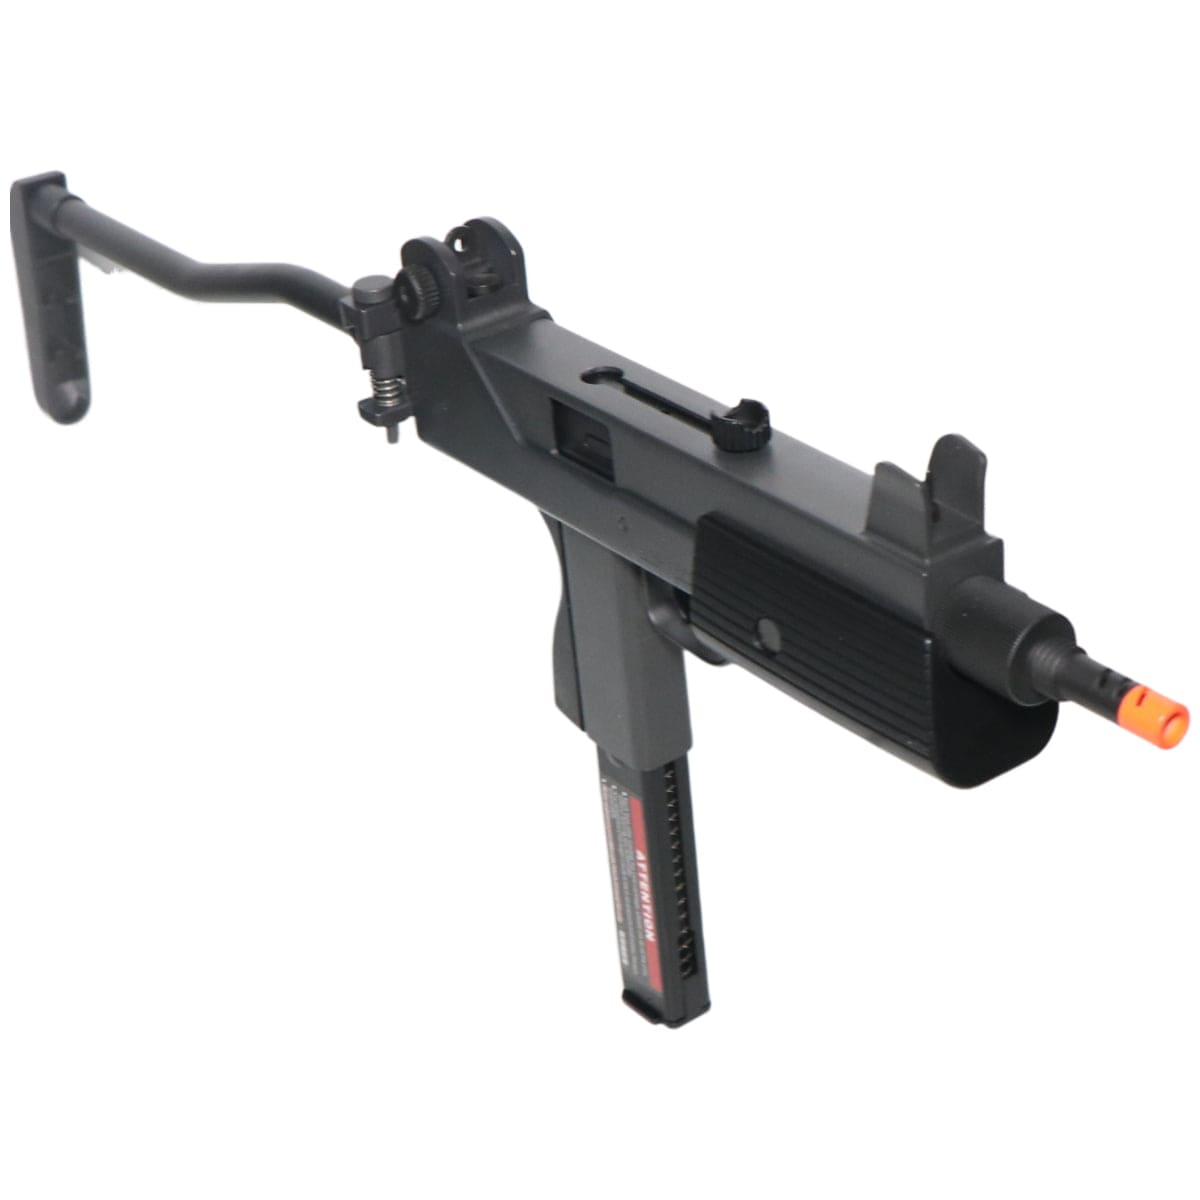 Airsportinggoods HFC HFC METAL FULL AUTO MAC 11 ZX GAS AIRSOFT BLOWBACK SMG TSD